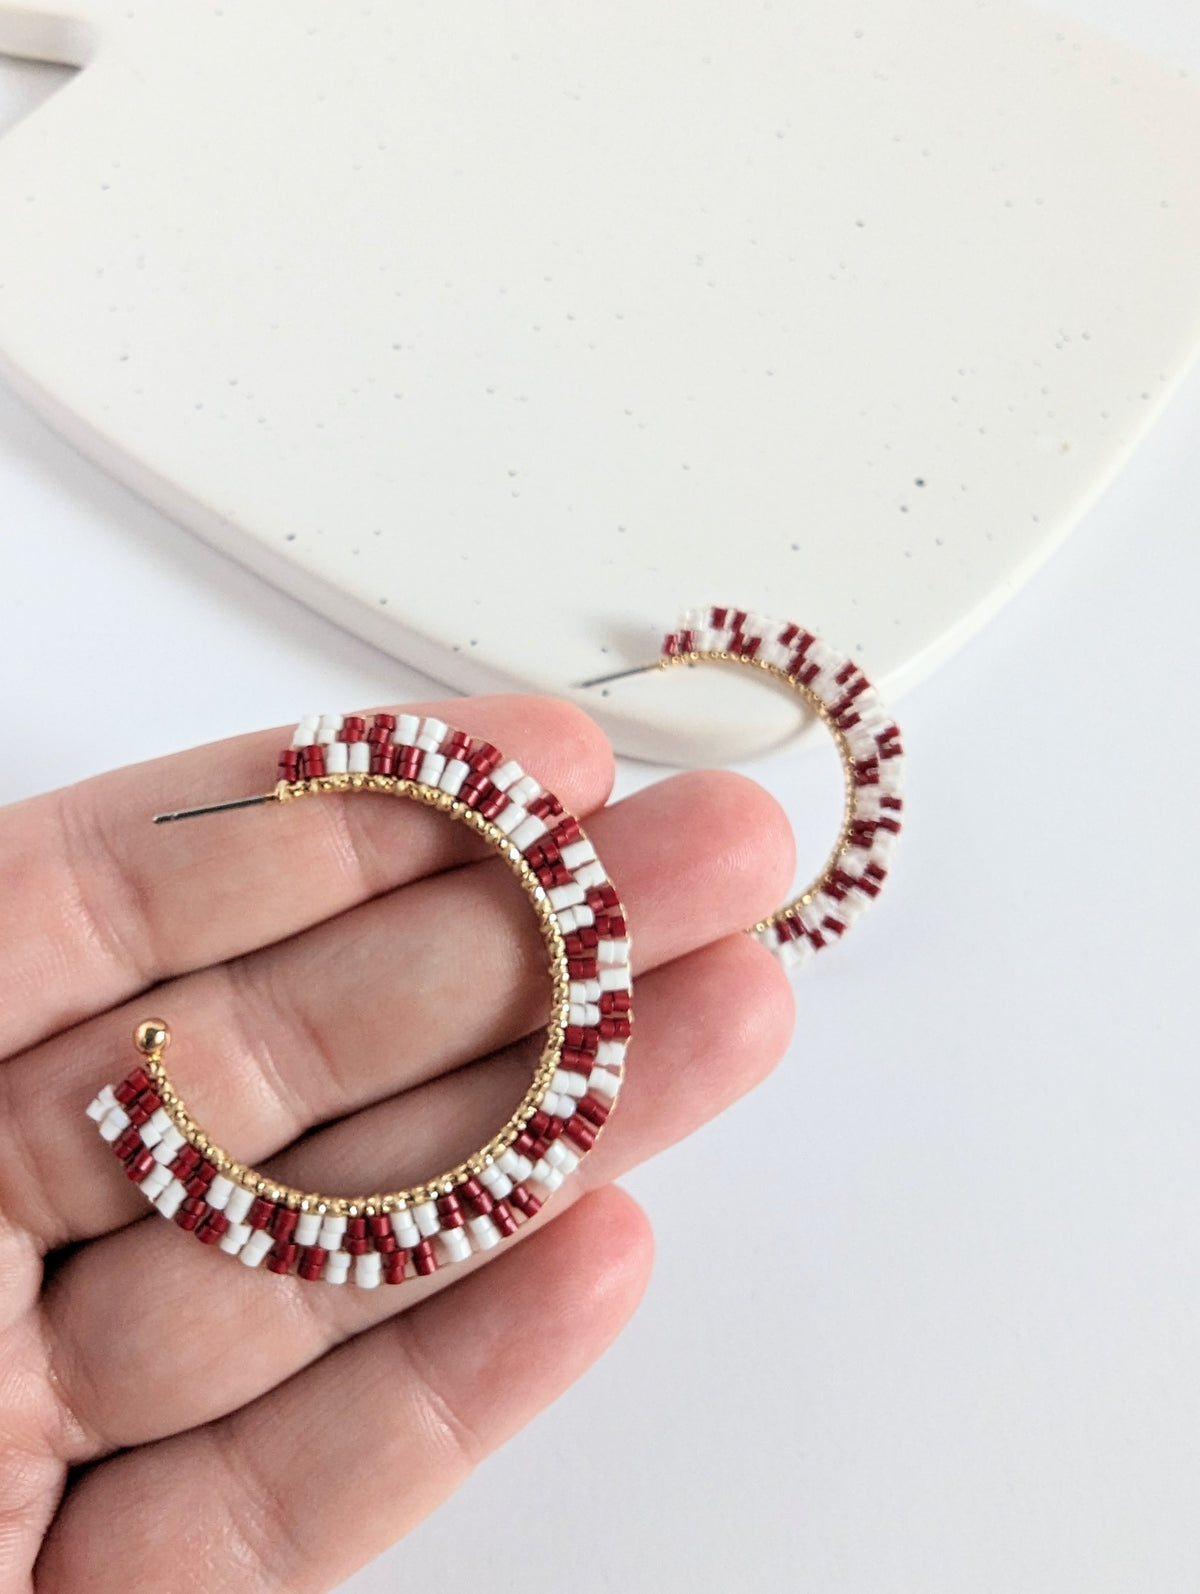 How To Make Earrings and Pendants Using Beading Hoops - Jewelry Tutorials 